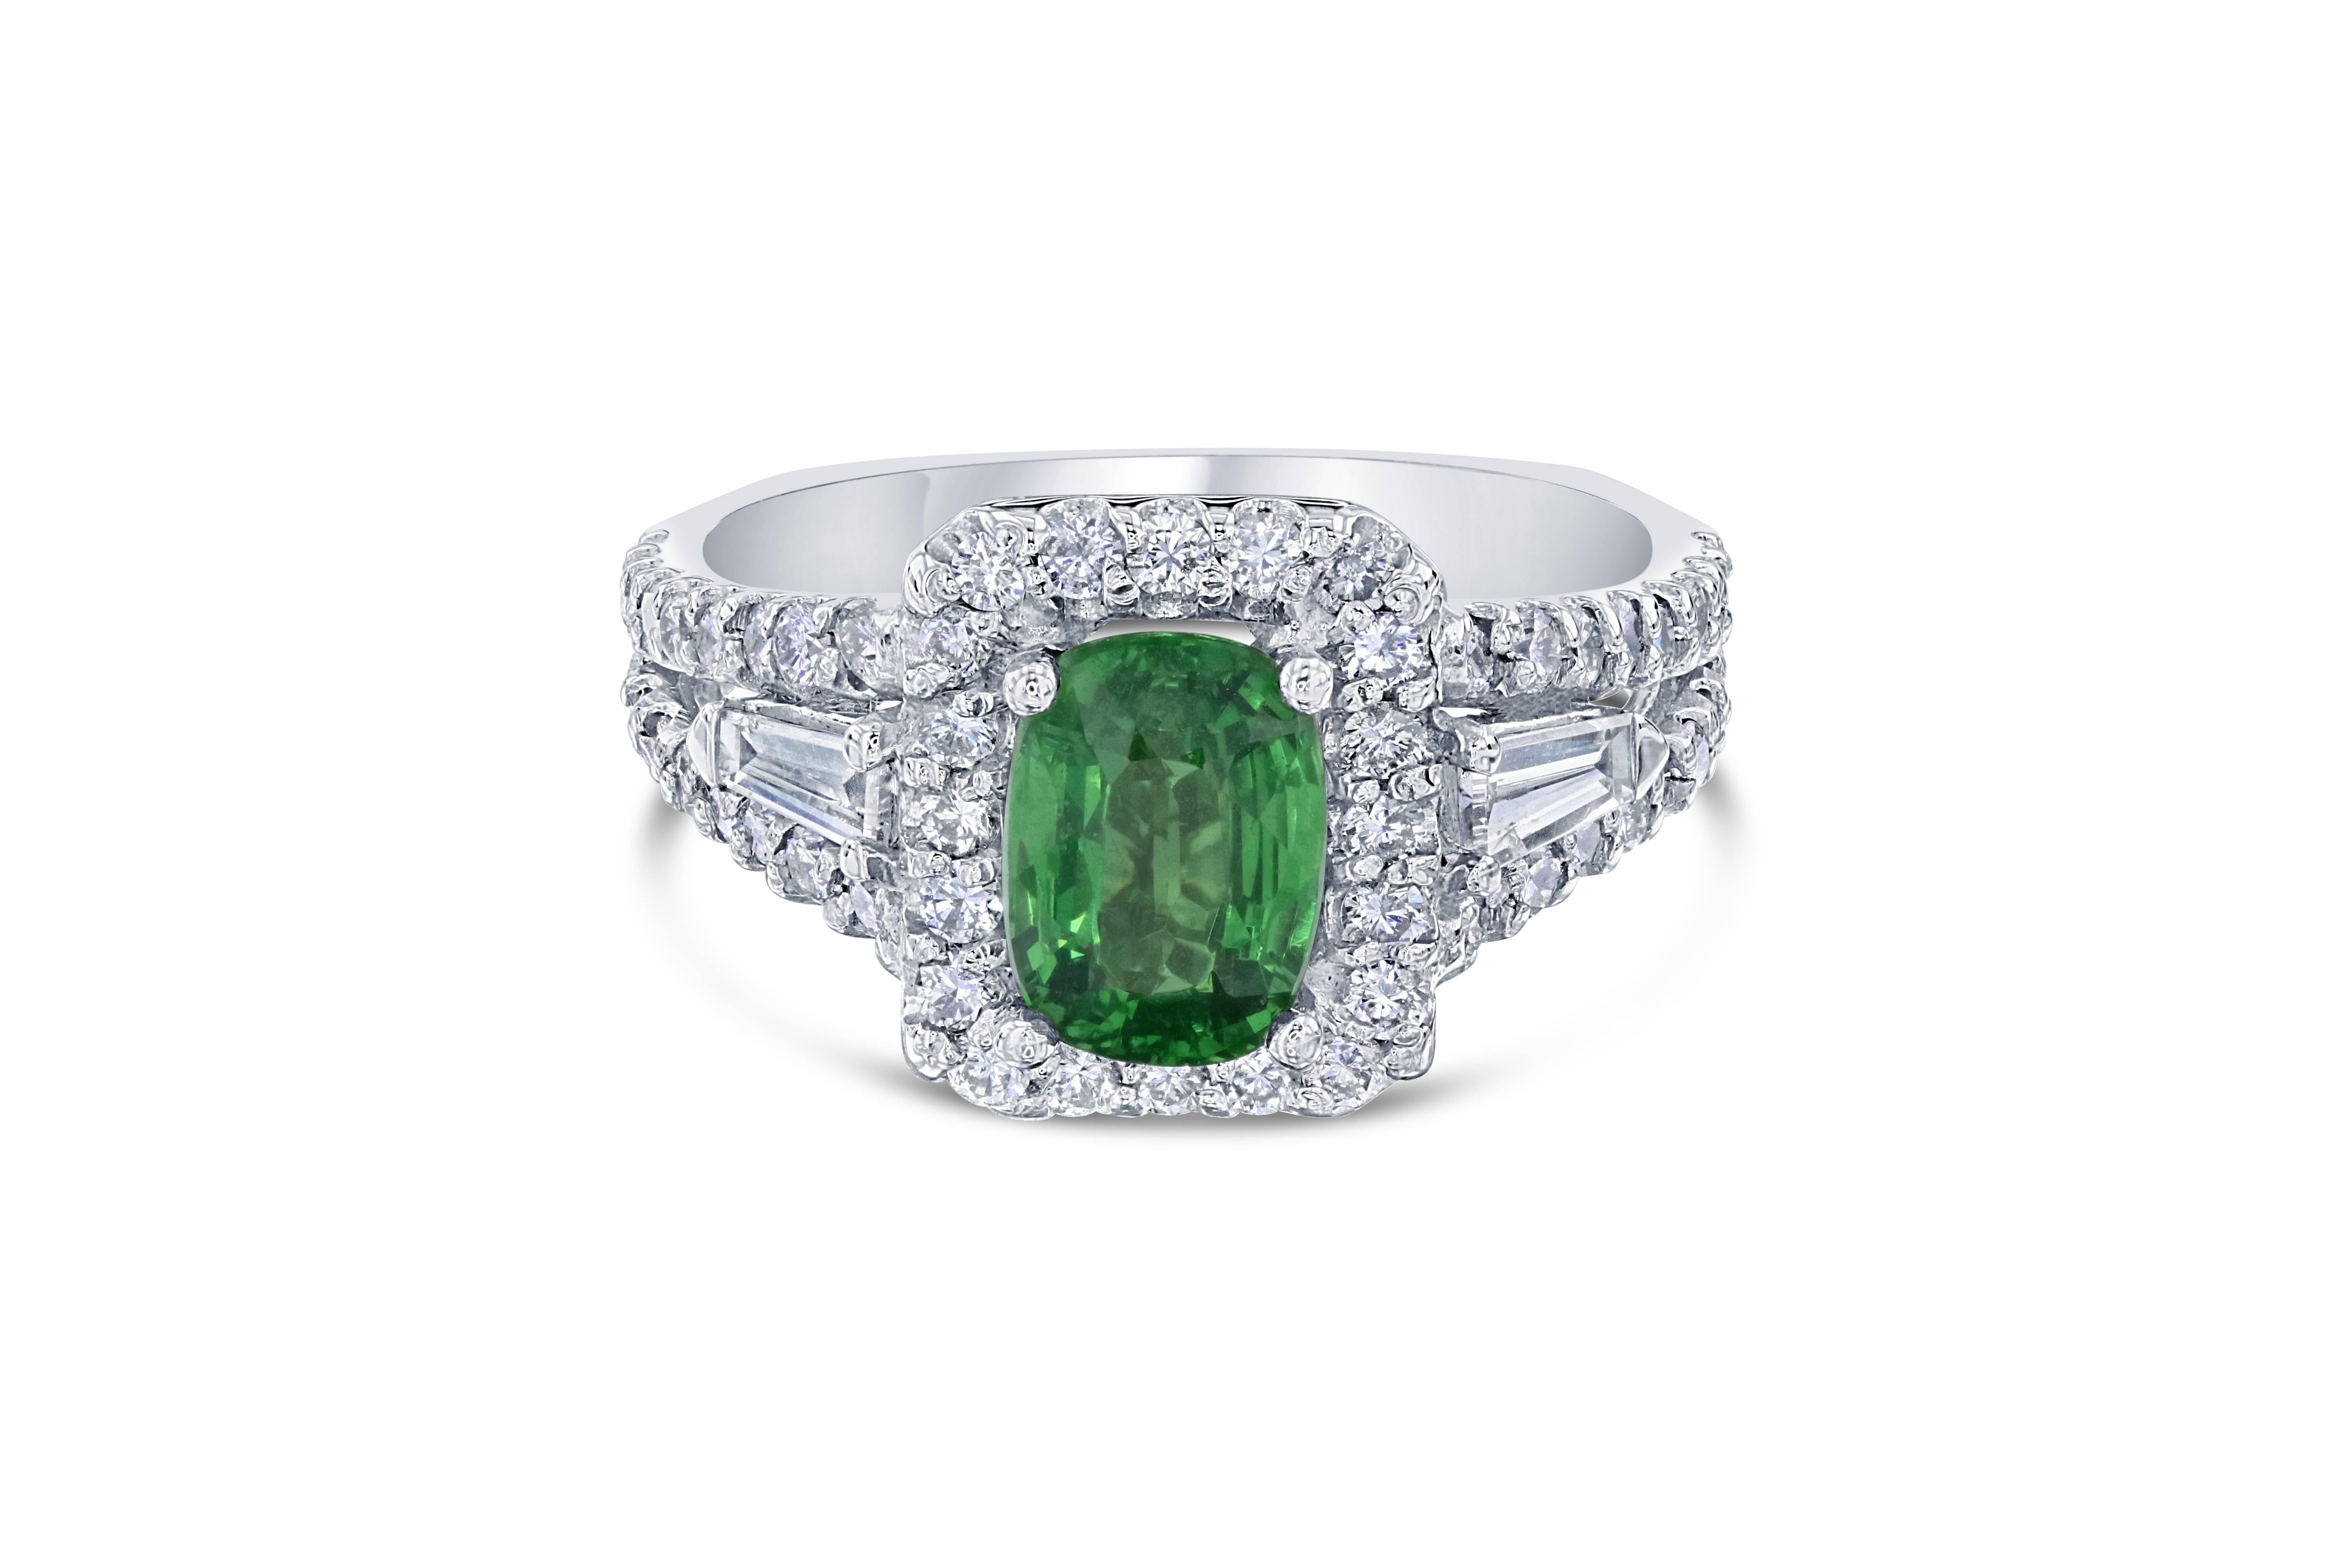 Elegant and unique setting that can compliment anyone!  This ring can easily transform into an engagement ring for the woman who wants to dip into something new and fresh.  

This ring has an Emerald cut Tsavorite which weighs 1.77 carats and is